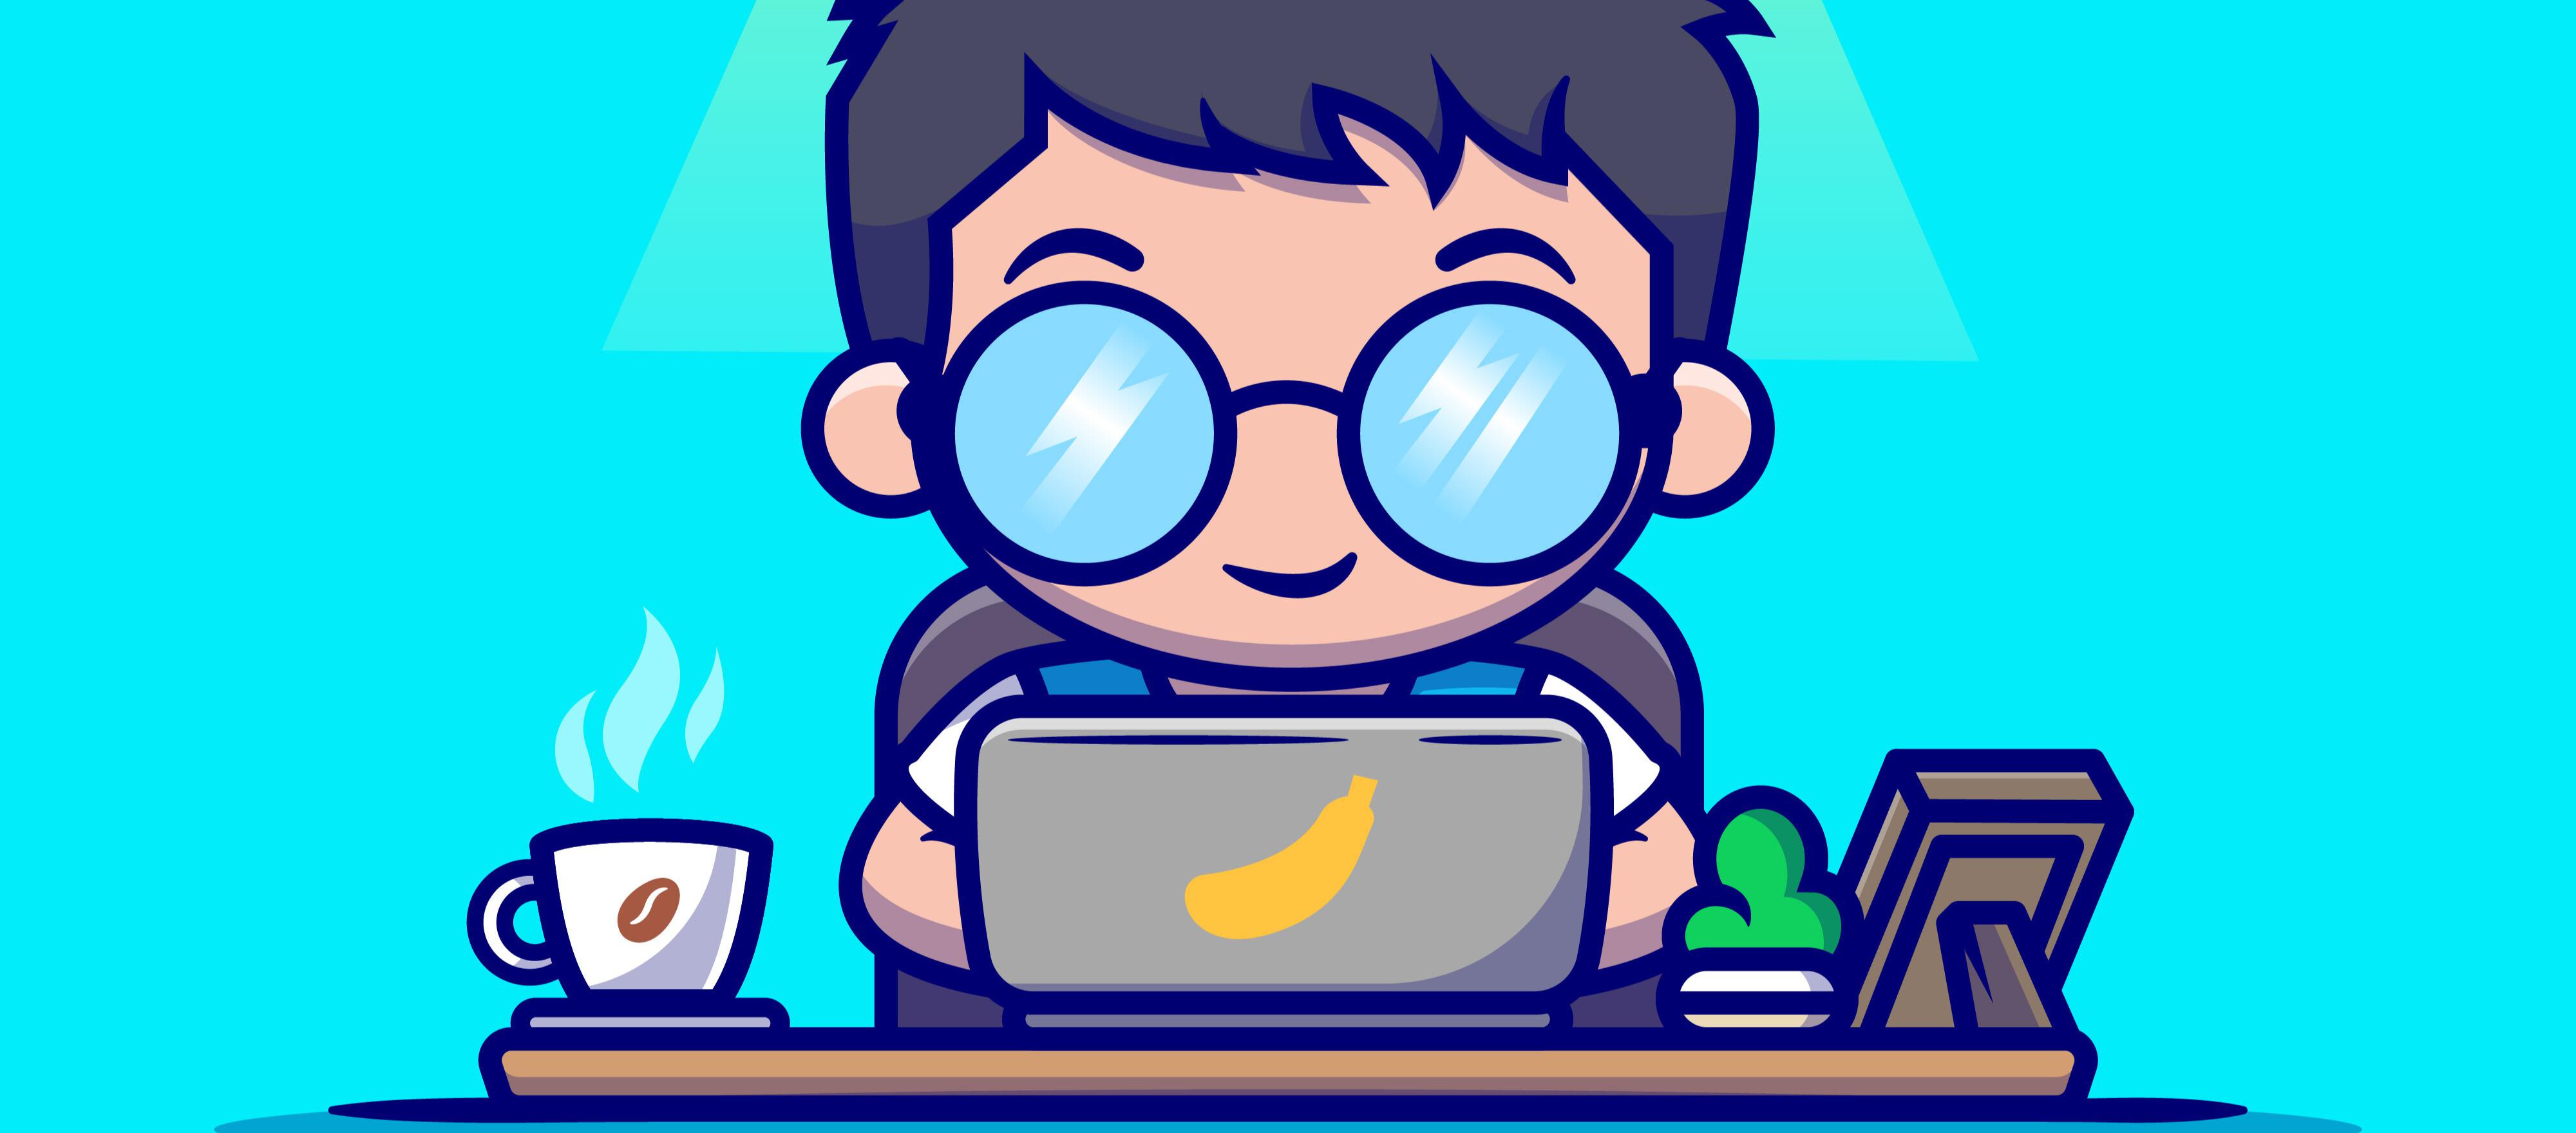 <a href="https://www.freepik.com/free-vector/cute-man-working-laptop-with-coffee-cartoon-vector-icon-illustration-people-technology-icon-concept-isolated-premium-vector-flat-cartoon-style_20188206.htm#query=computer%20cartoon&position=6&from_view=search&track=ais">Image by catalyststuff</a> on Freep